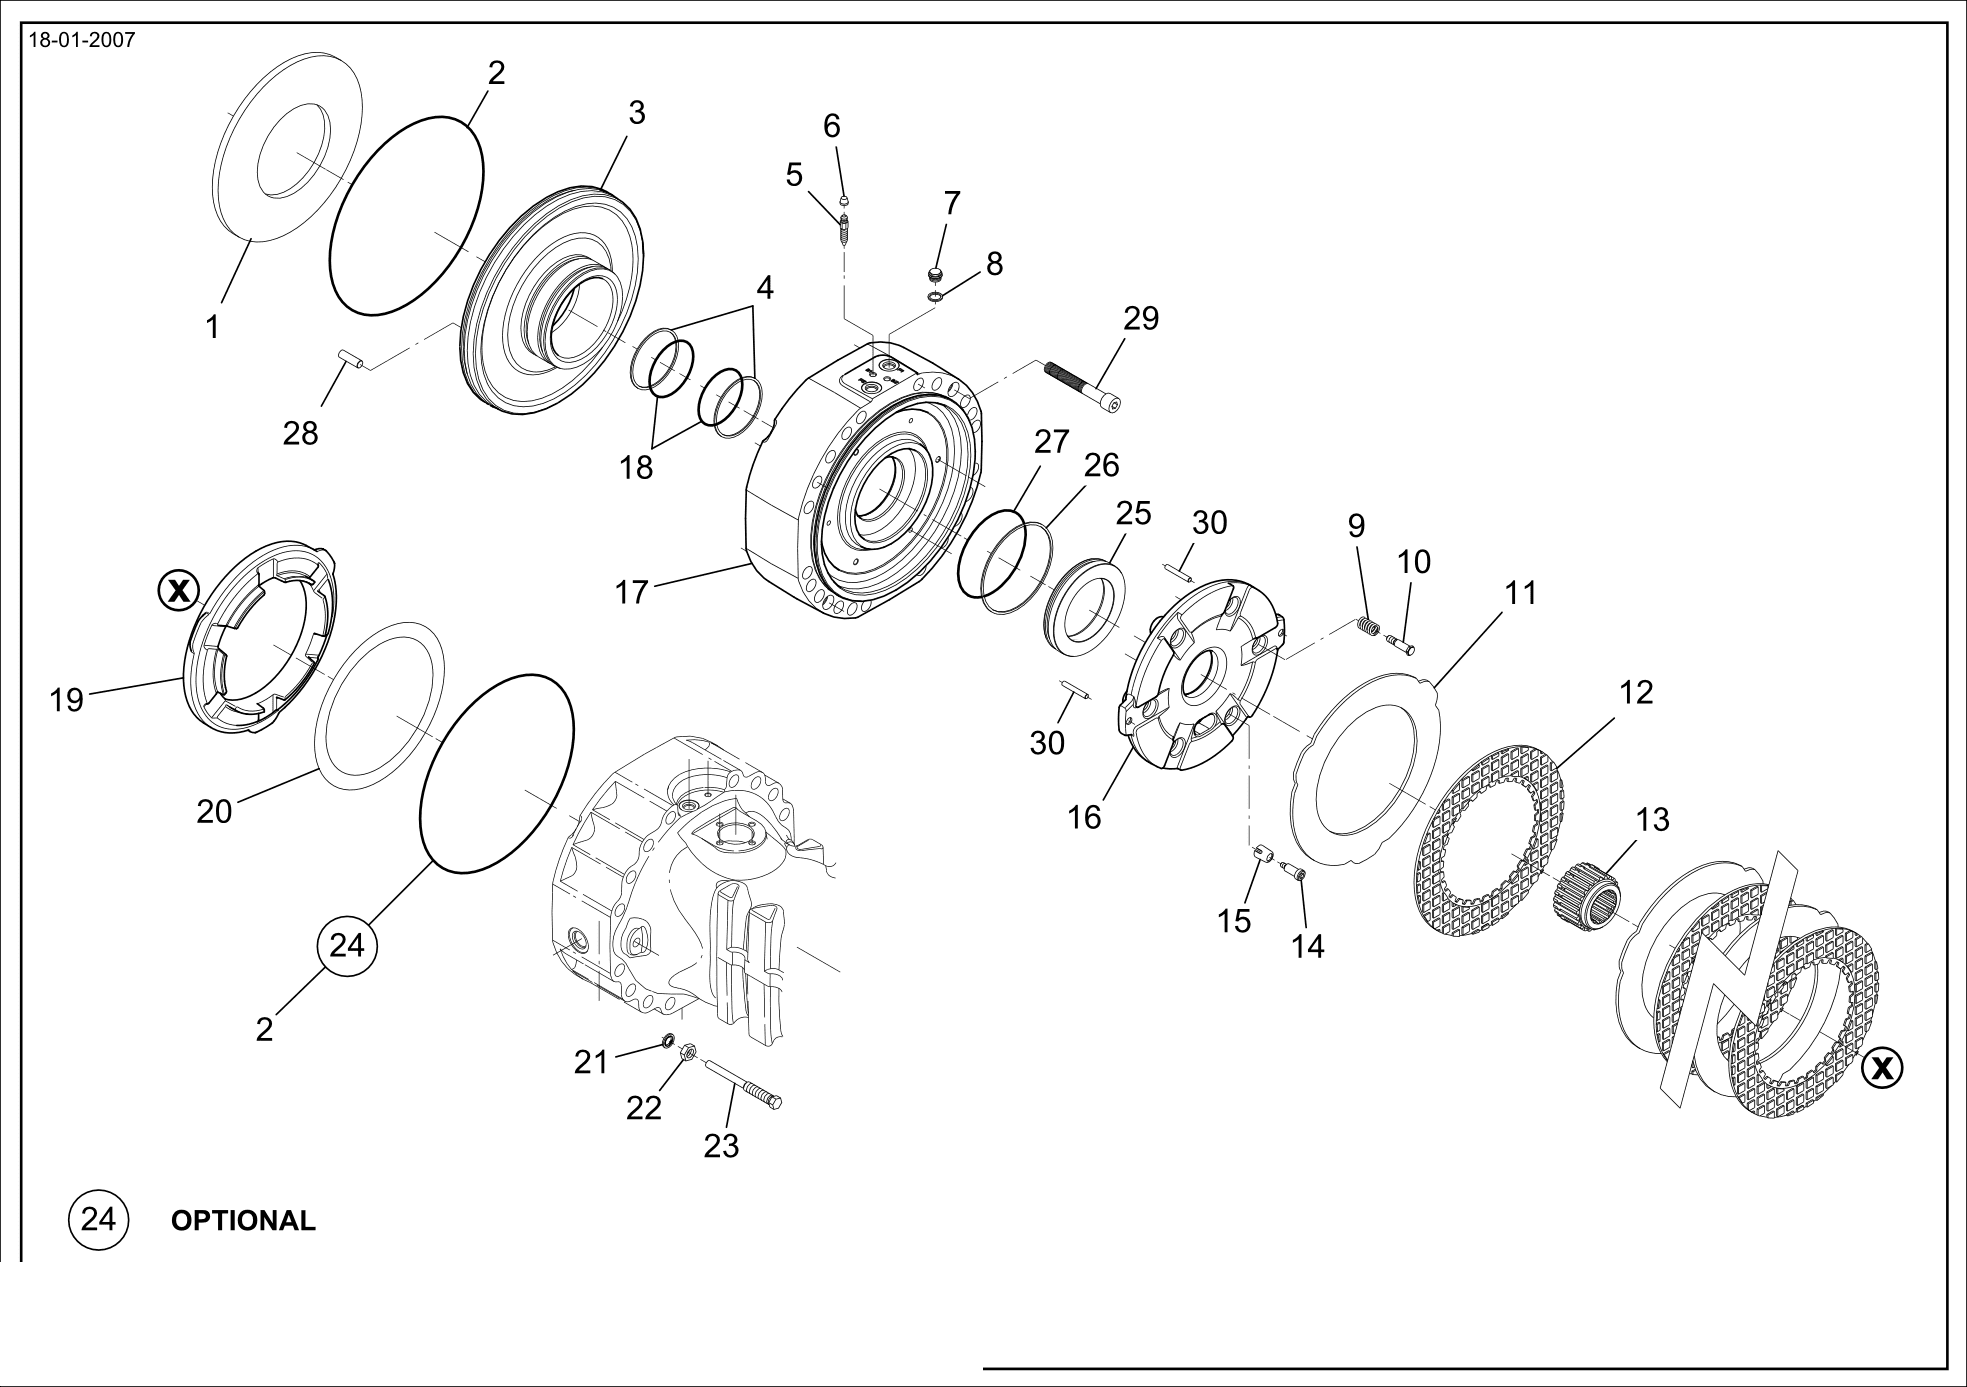 drawing for MERLO 048695 - O - RING (figure 3)